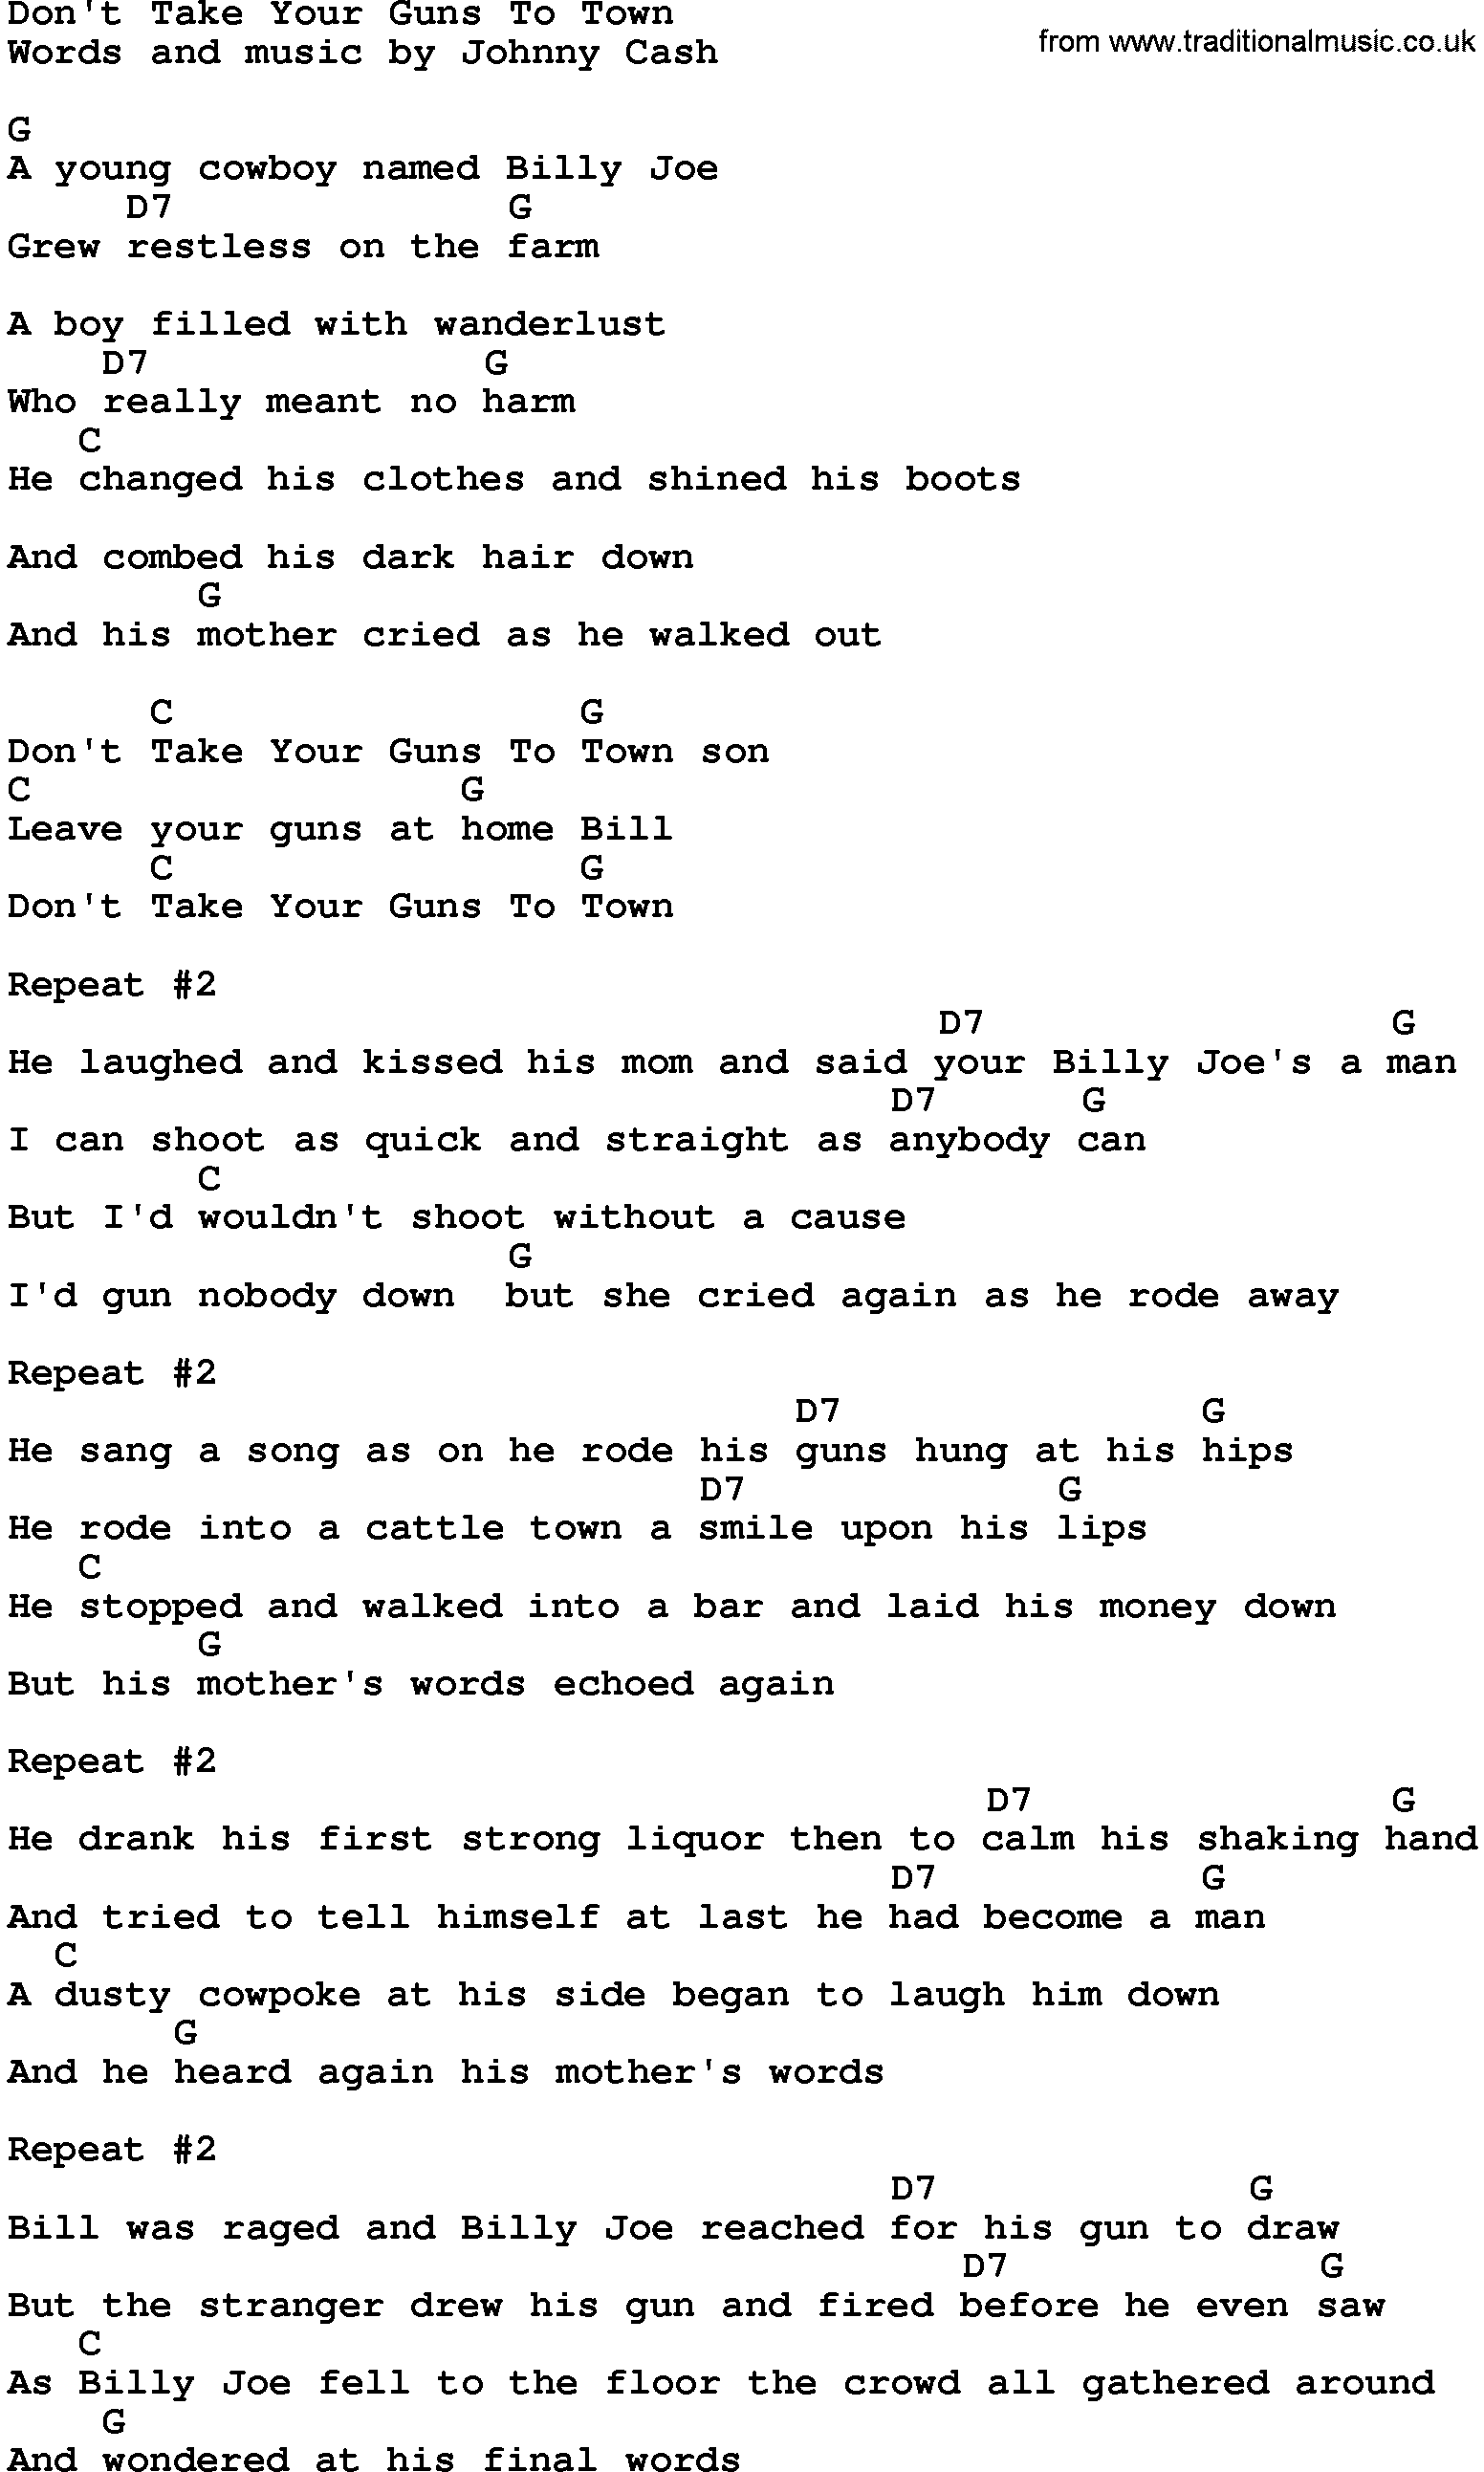 Country music song: Don't Take Your Guns To Town lyrics and chords